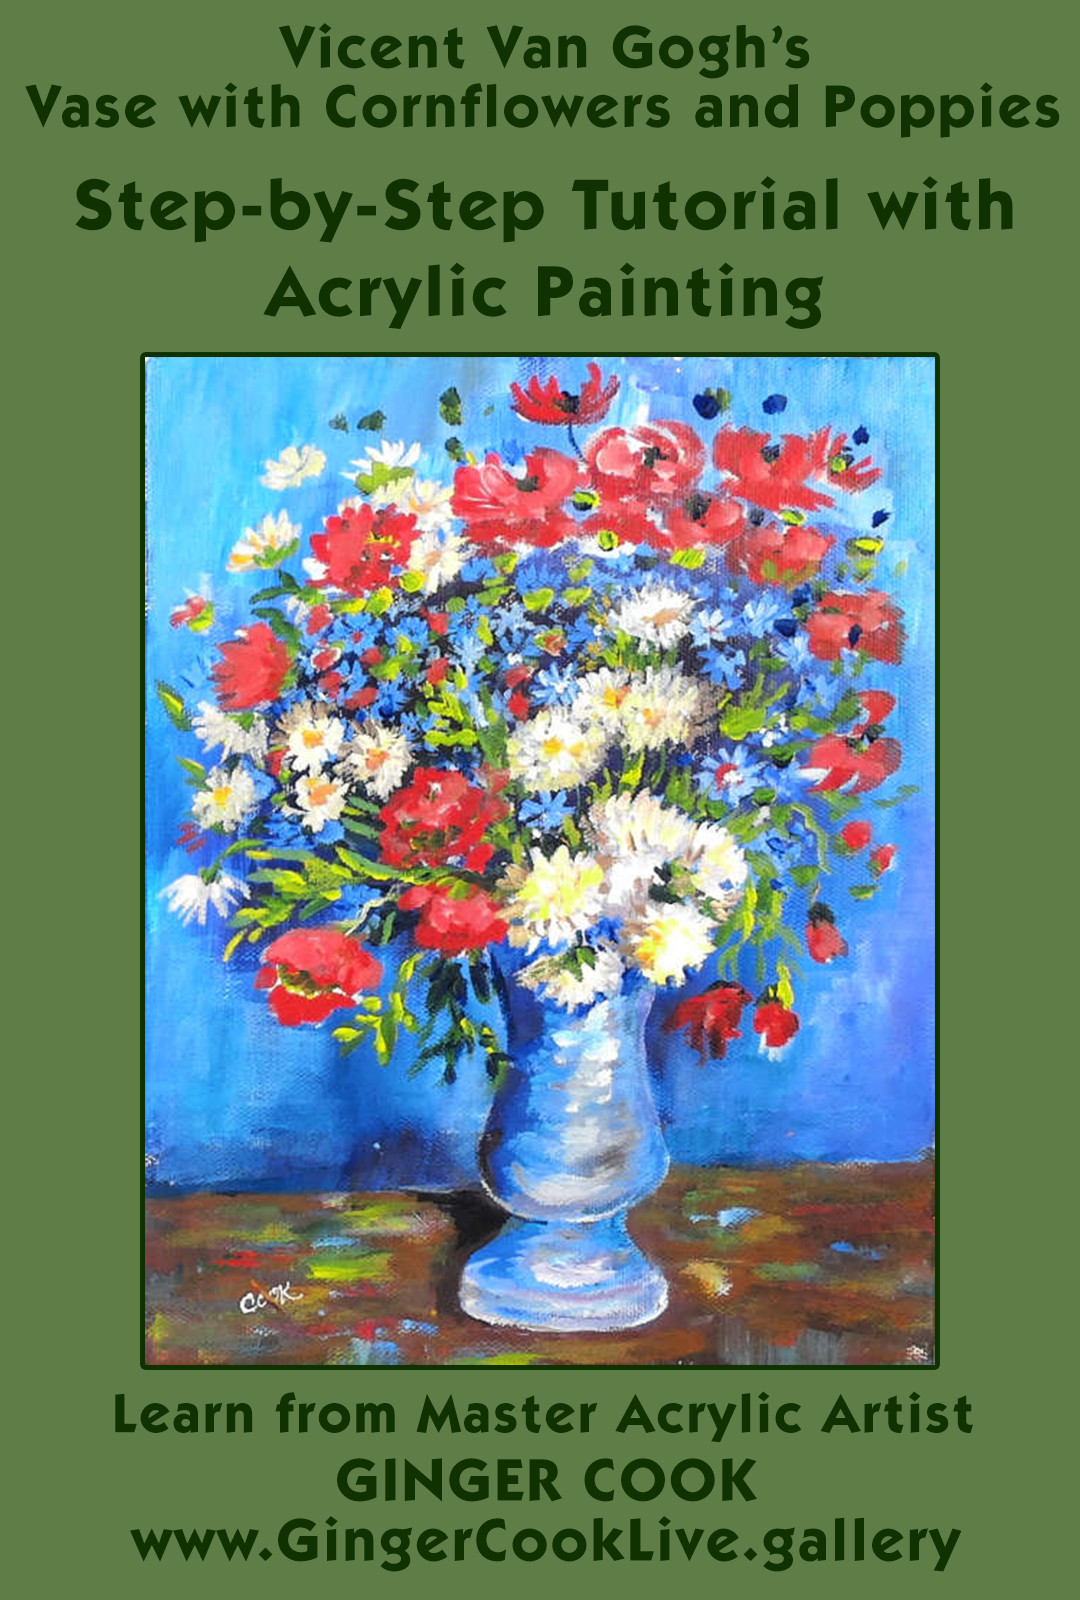 23 Nice Van Gogh Vase with Cornflowers and Poppies 2024 free download van gogh vase with cornflowers and poppies of store front in van goghs vase with strawflowers and poppies poster